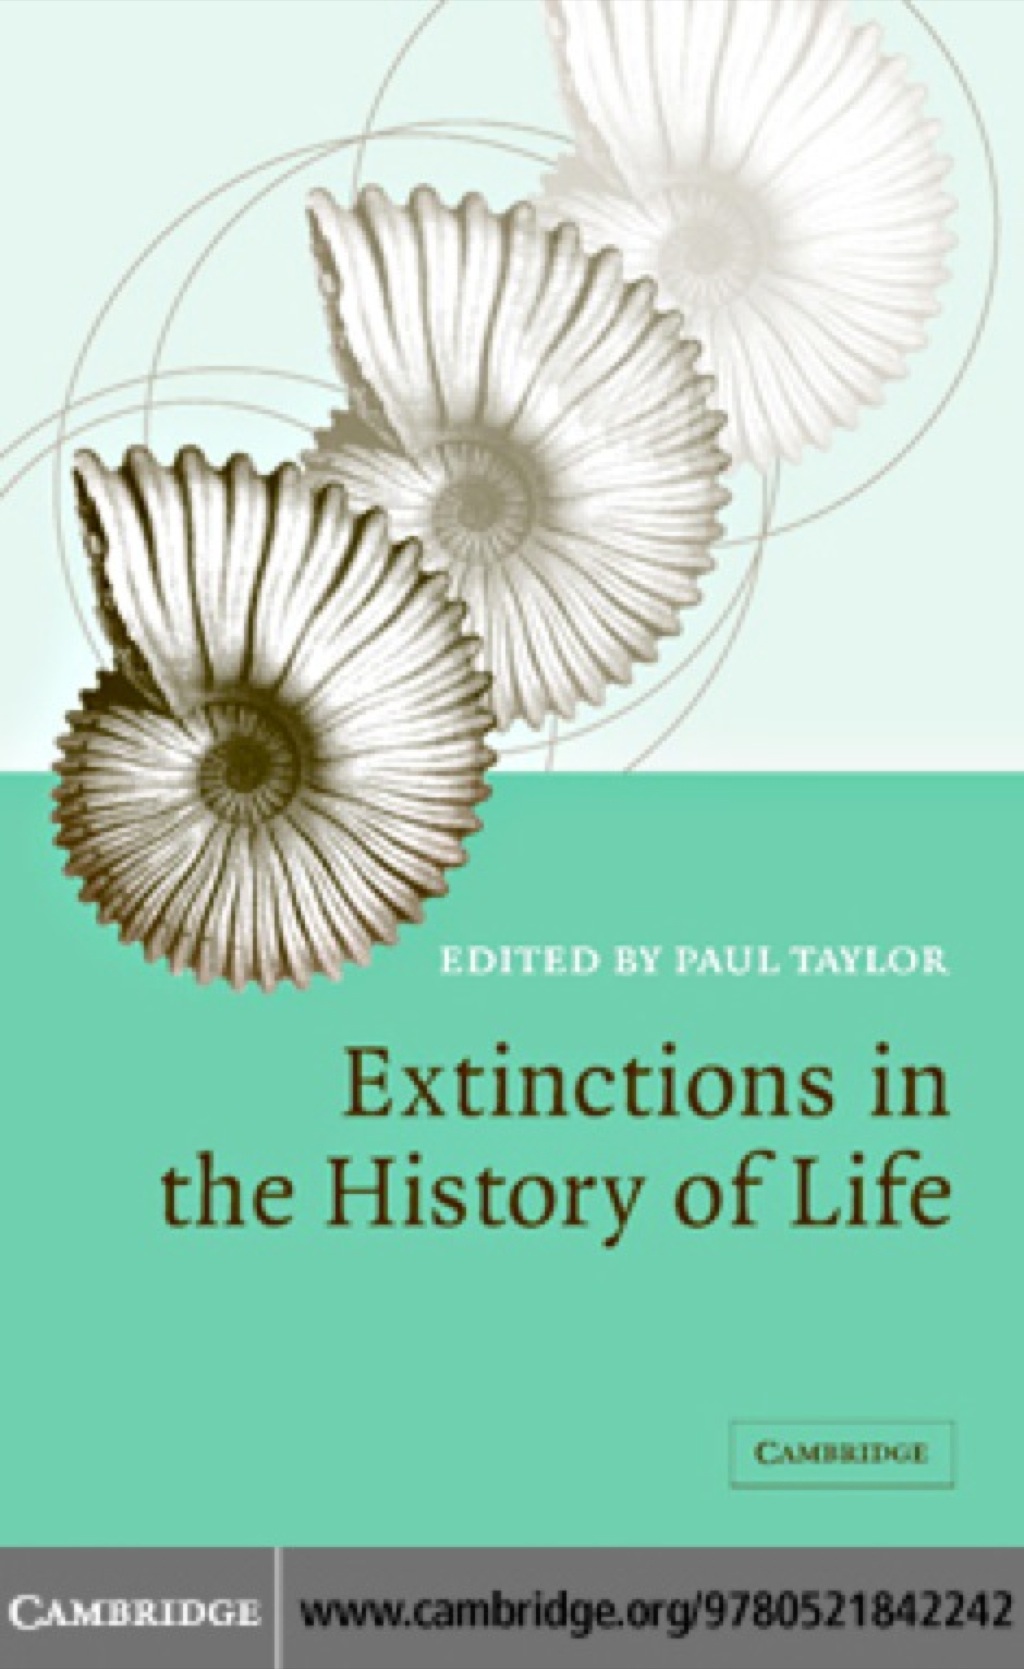 Extinctions in the History of Life (eBook) - Paul D. Taylor